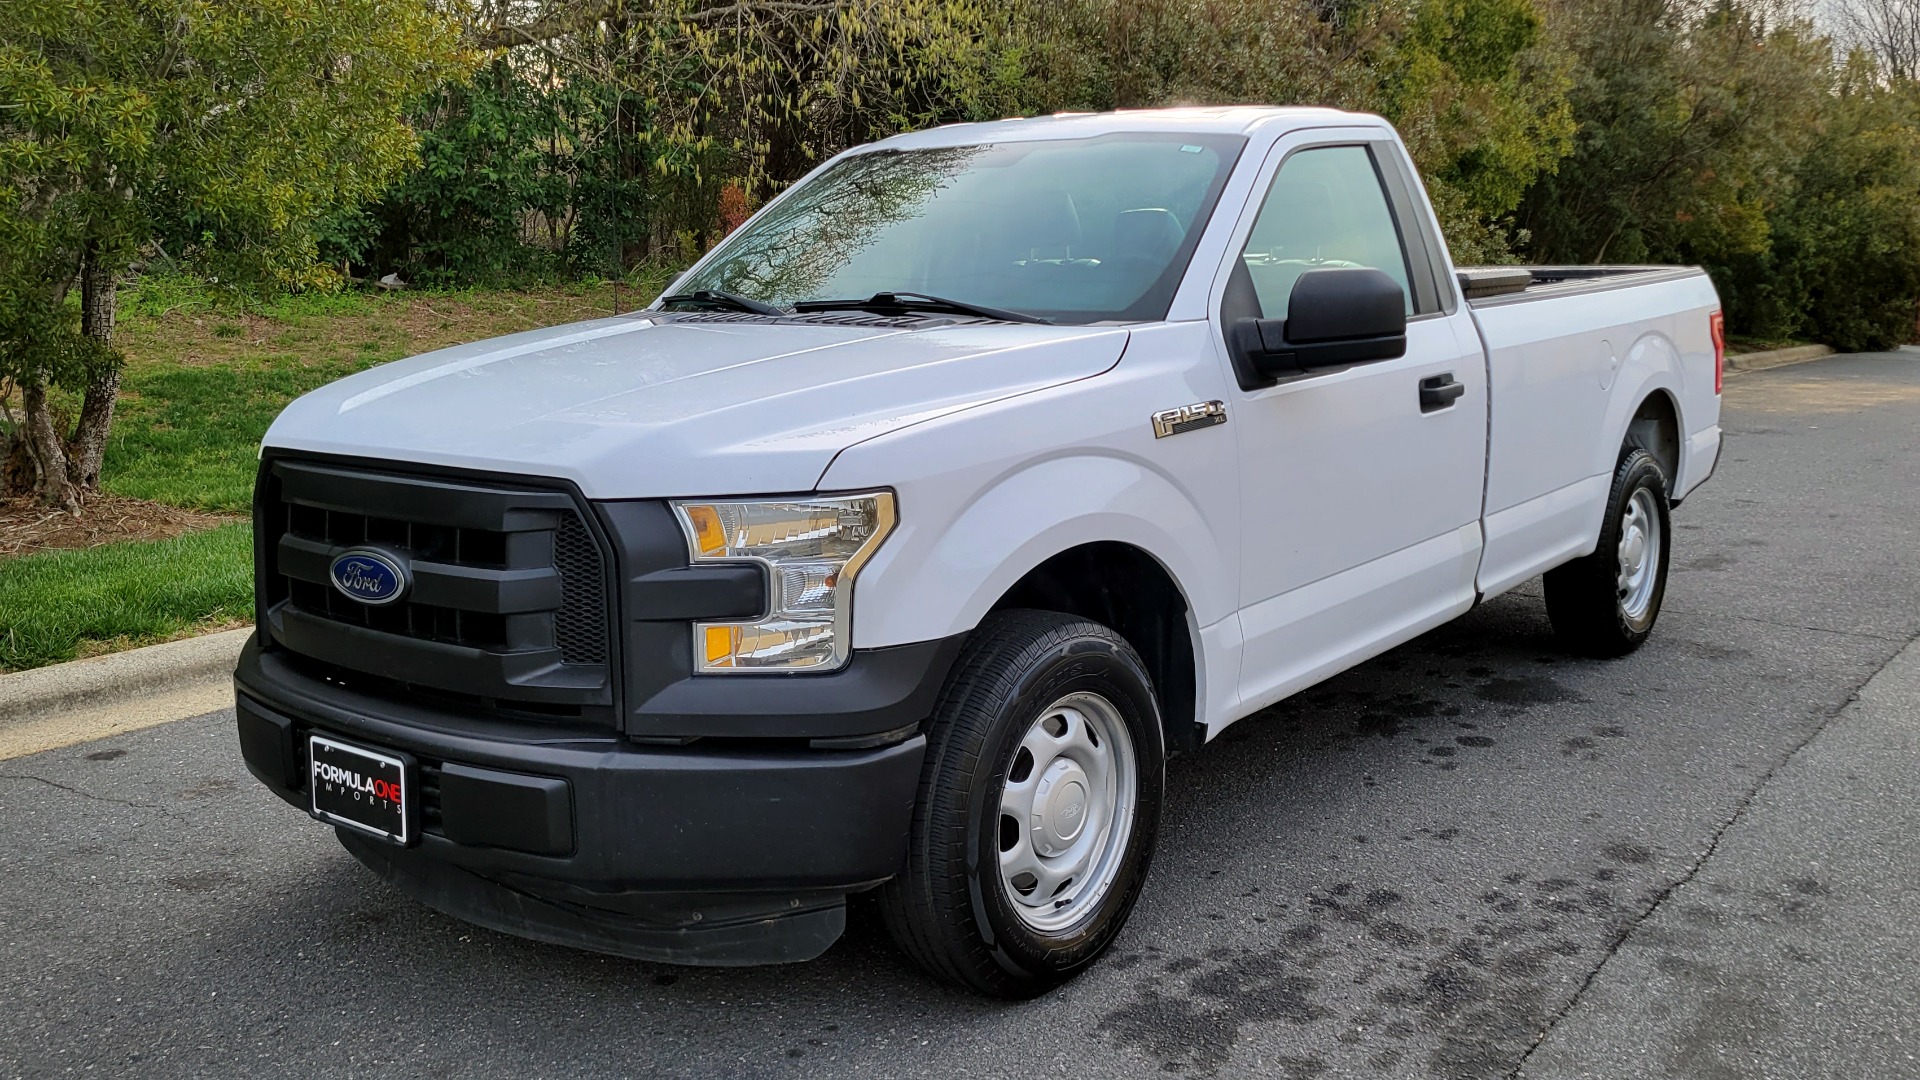 Used 2016 Ford F-150 XL REGULAR CAB 4X2 / 3.5L V6 / 6-SPD AUTO / TOWING / TOOL BOX for sale Sold at Formula Imports in Charlotte NC 28227 1